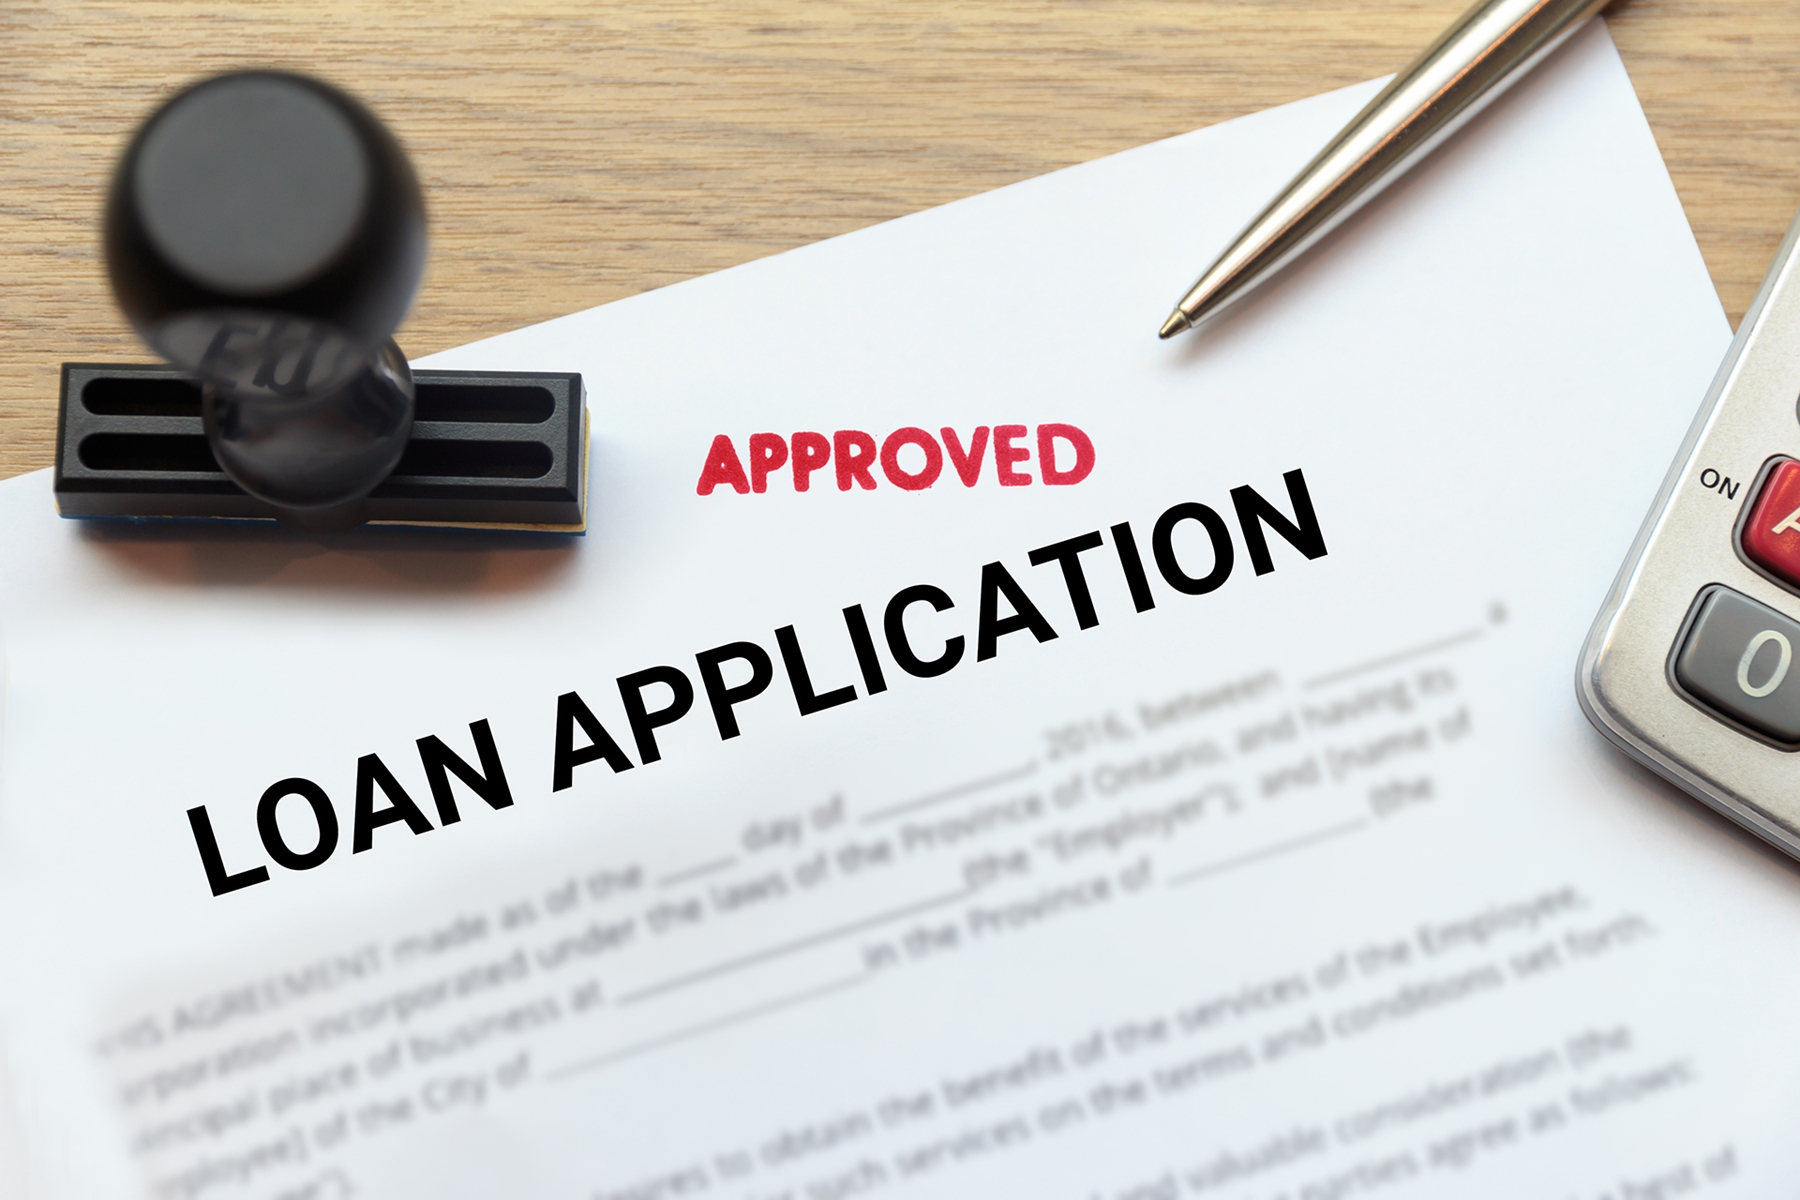 Approved loan application laying on a table